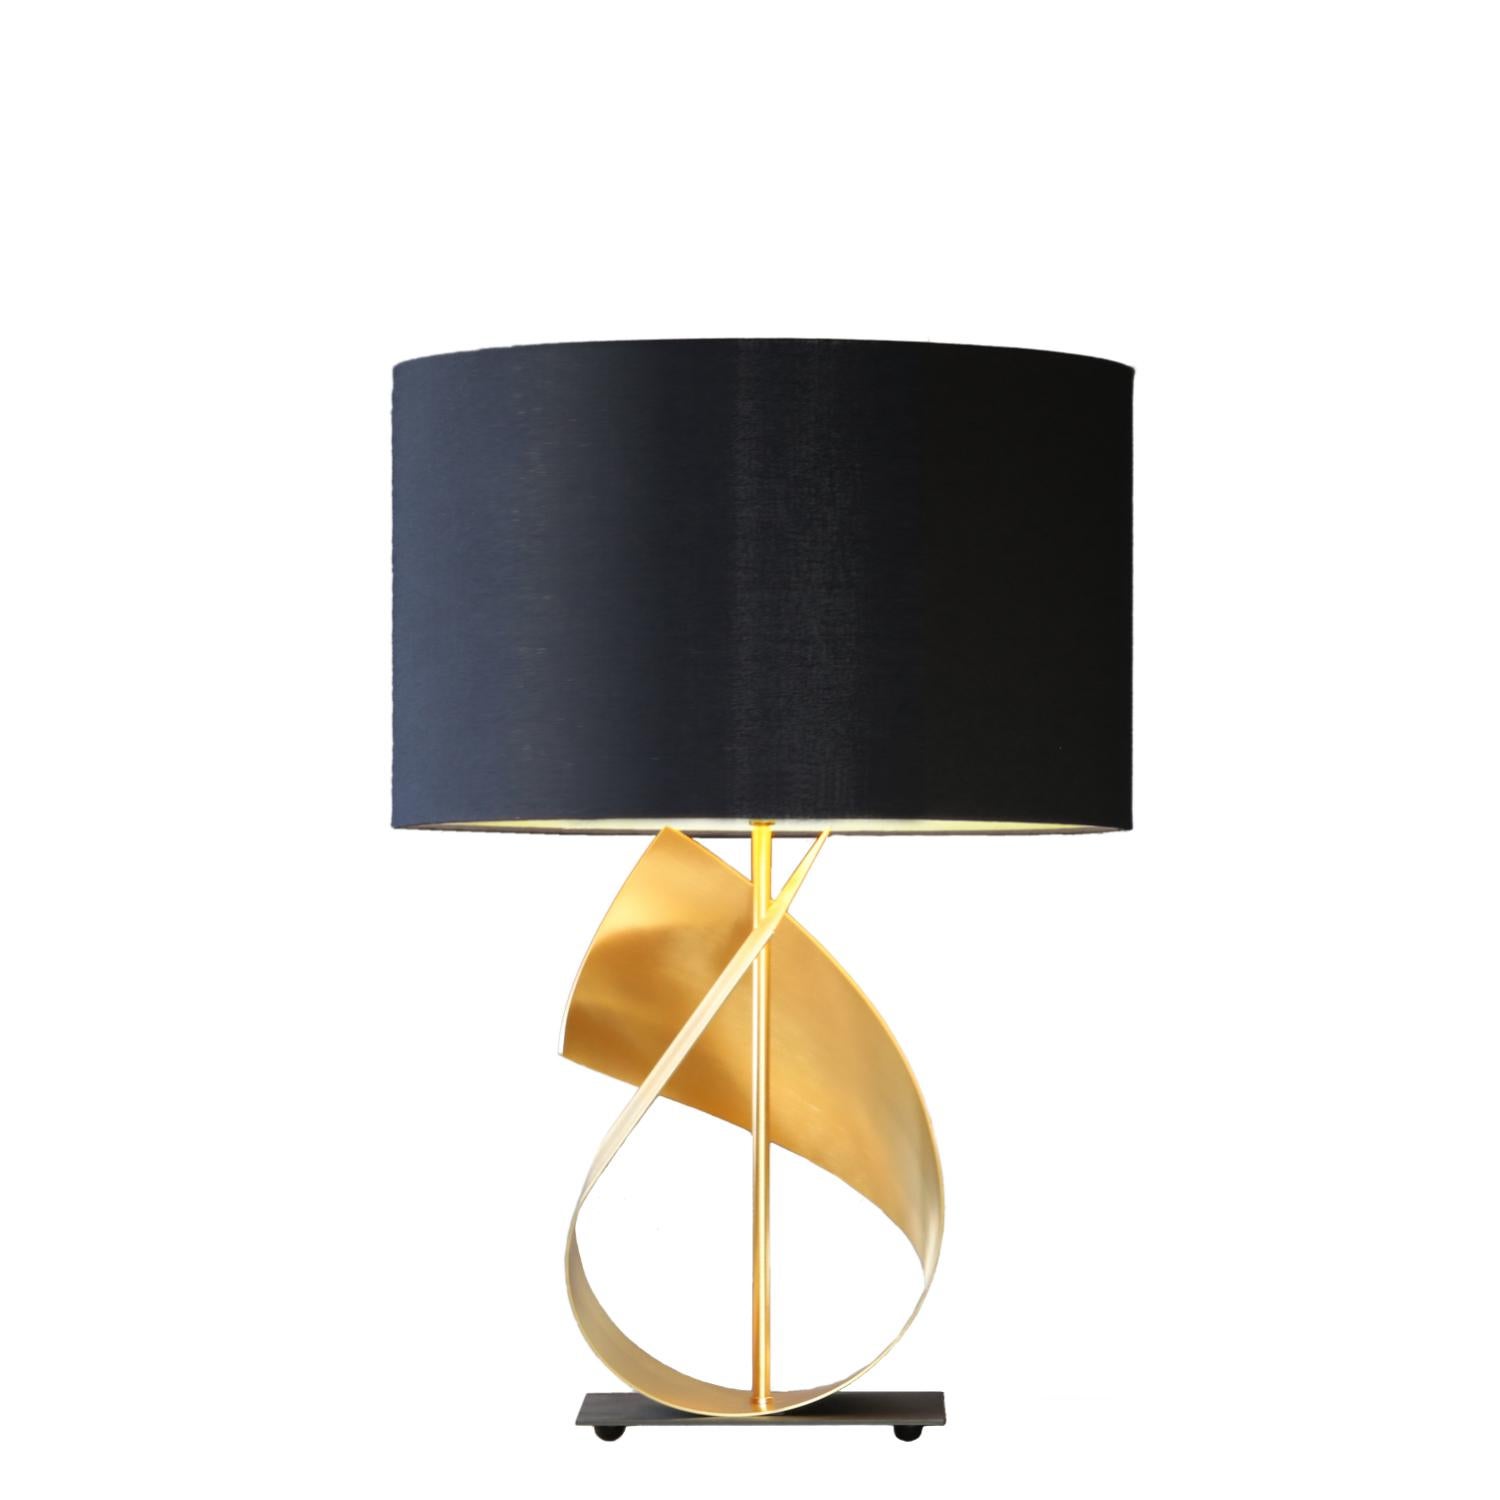 European Flux Table Lamp in Brushed Brass